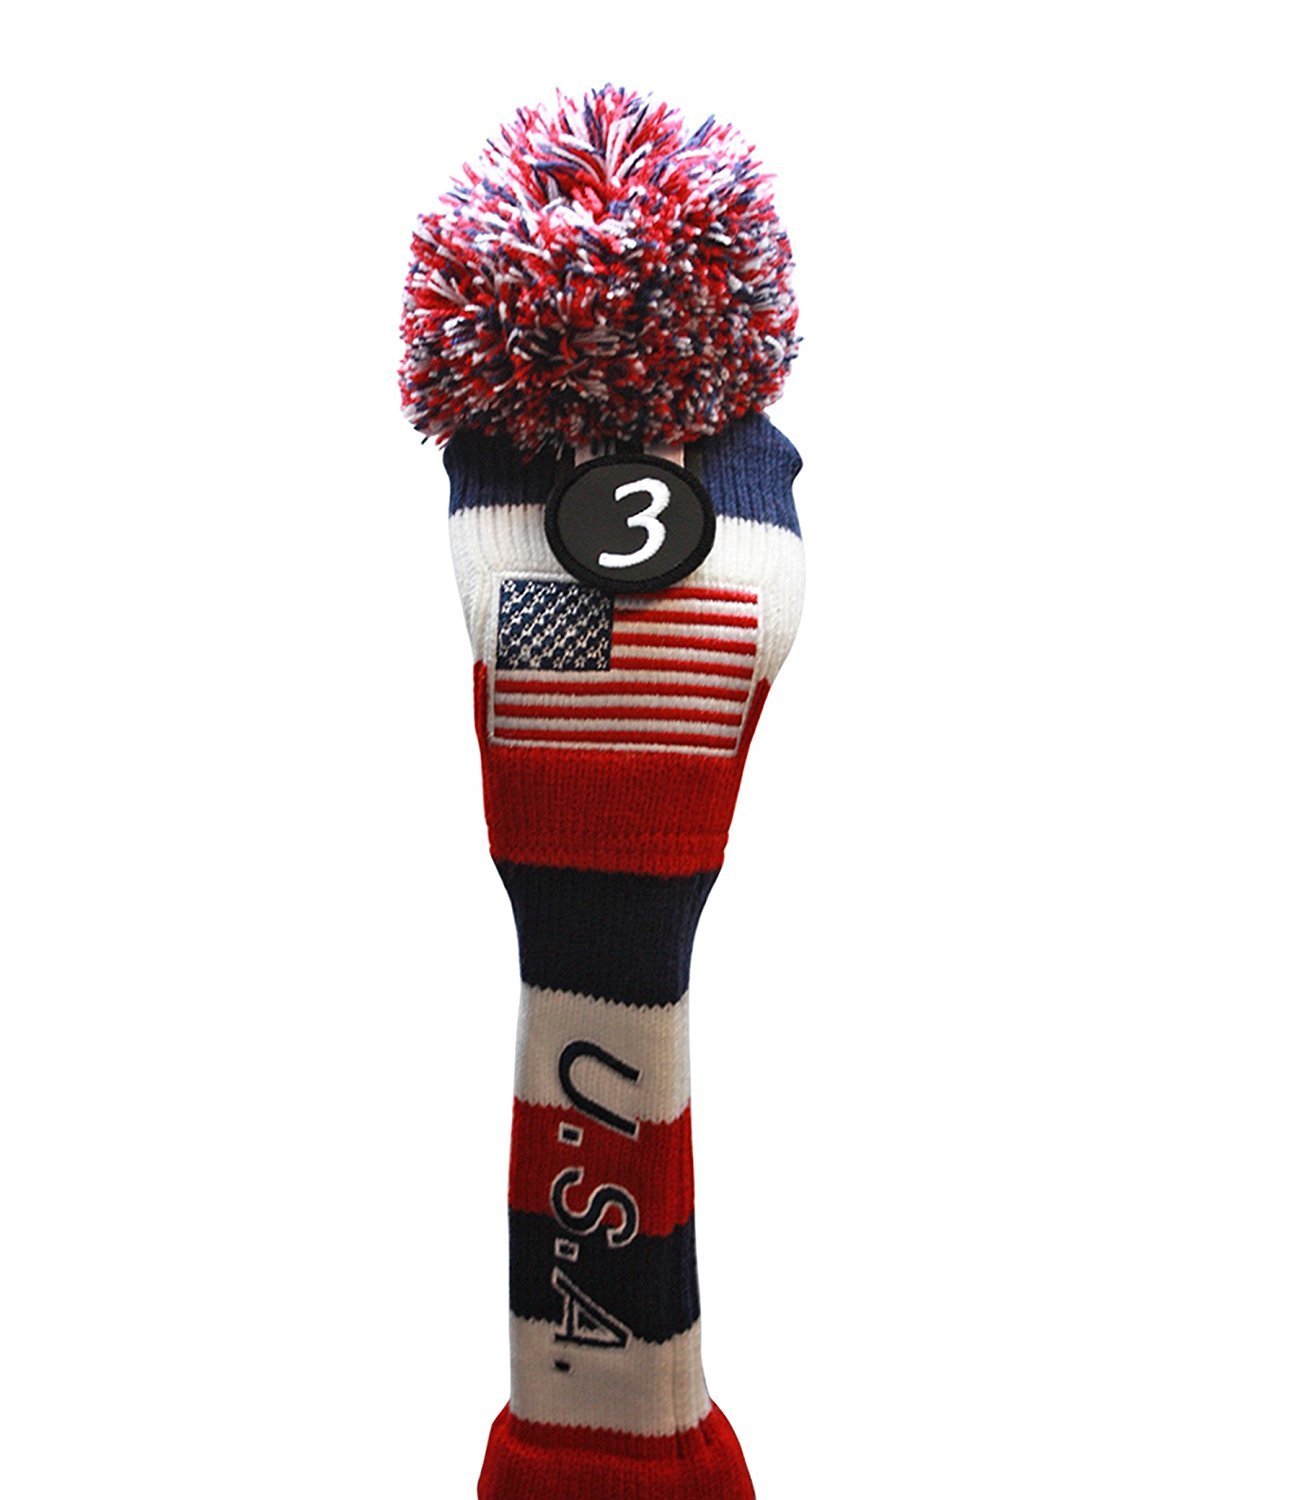 USA Majek Golf Driver 1 3 5 X Fairway Woods Headcovers Pom Pom Knit Limited Edition Vintage Classic Traditional Flag Stars Red White Blue Stripes Retro Head Cover Fits 460cc Drivers and 260cc Woods - image 3 of 8